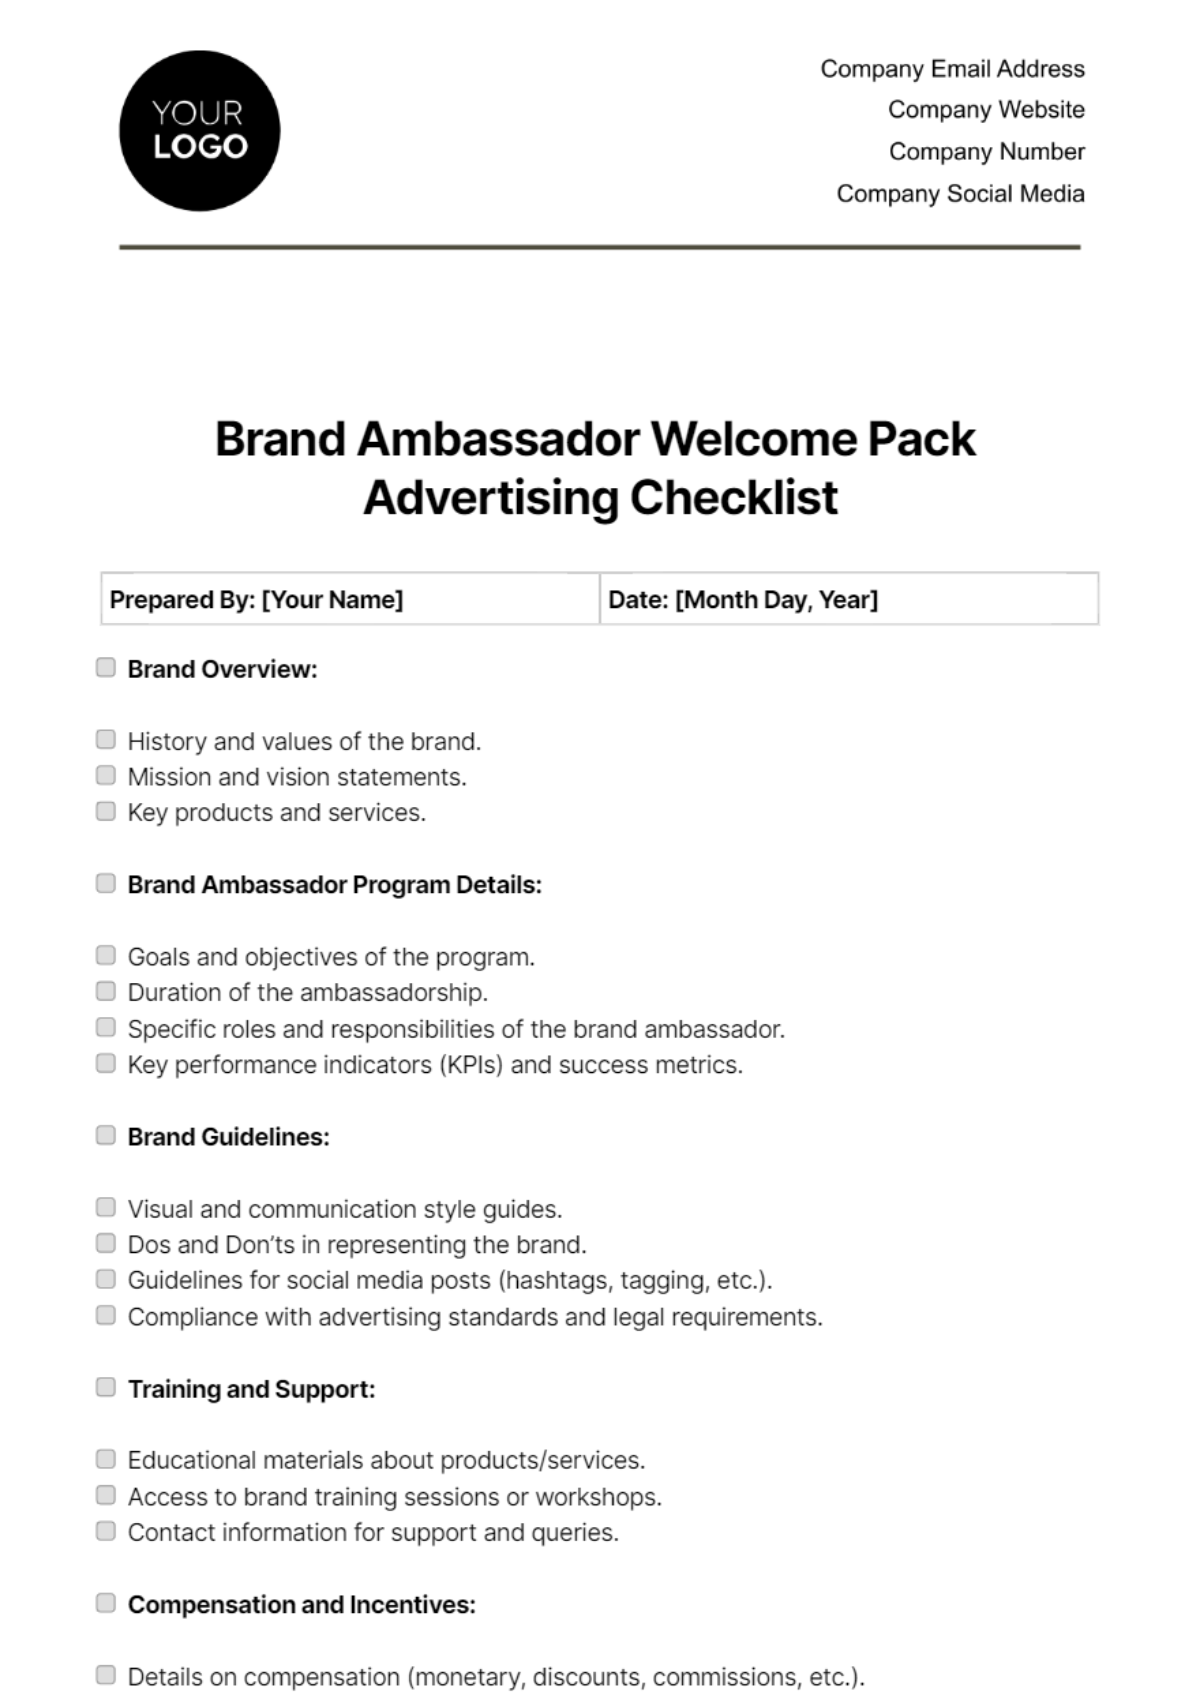 Free Brand Ambassador Welcome Pack Advertising Checklist Template